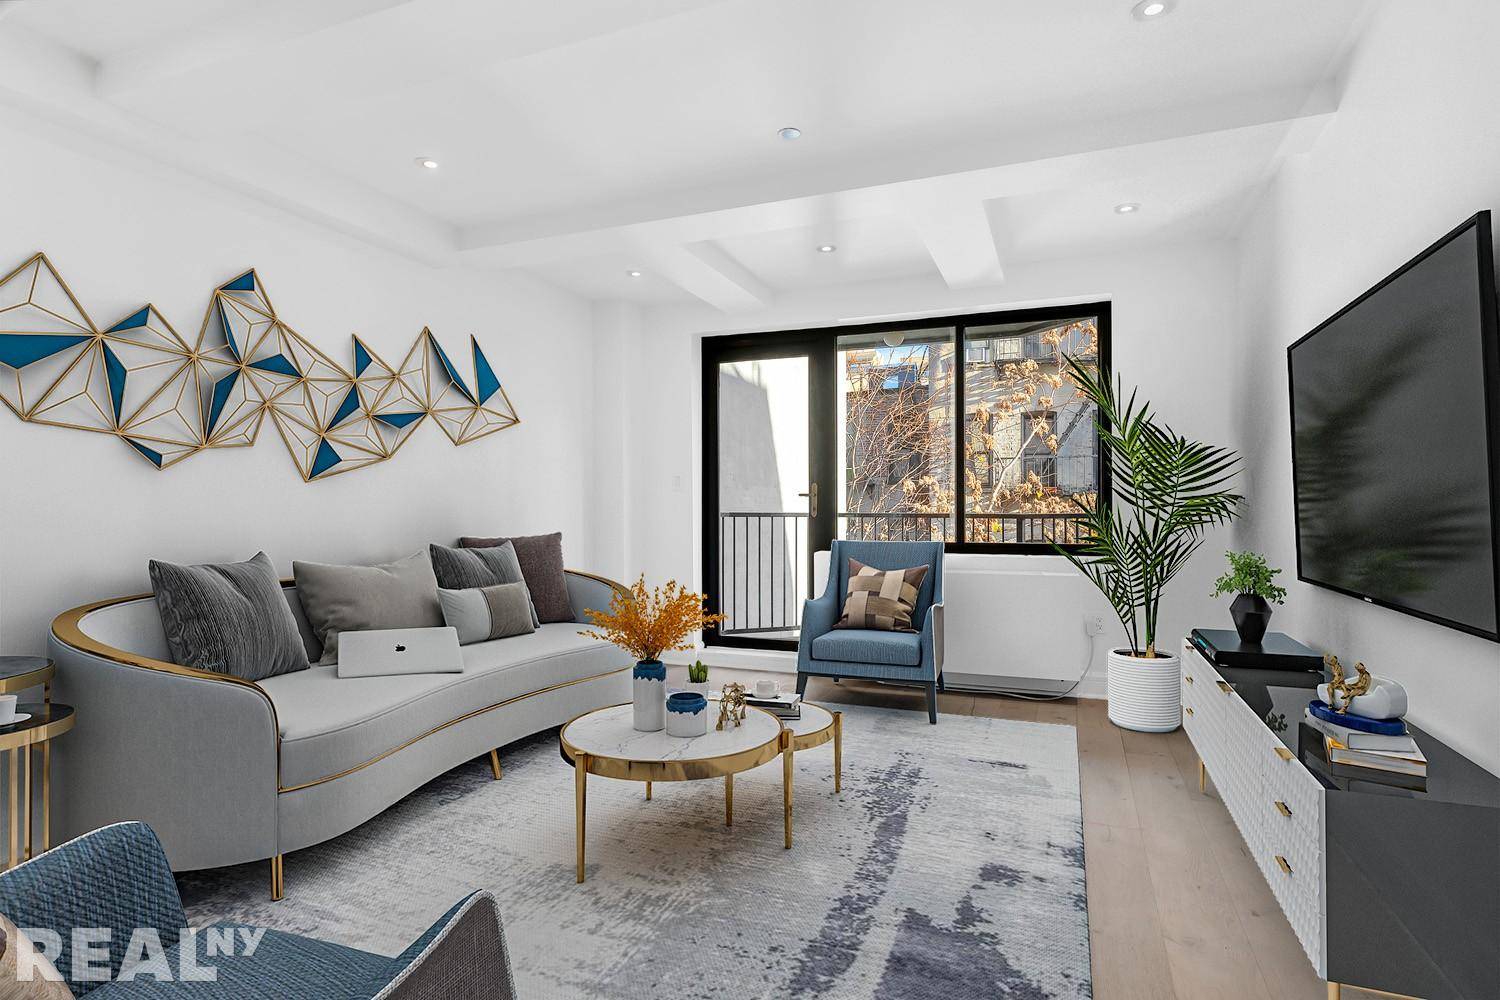 FOR IMMEDIATE OCCUPANCYBe the FIRST to live in this stunning East Village residence !